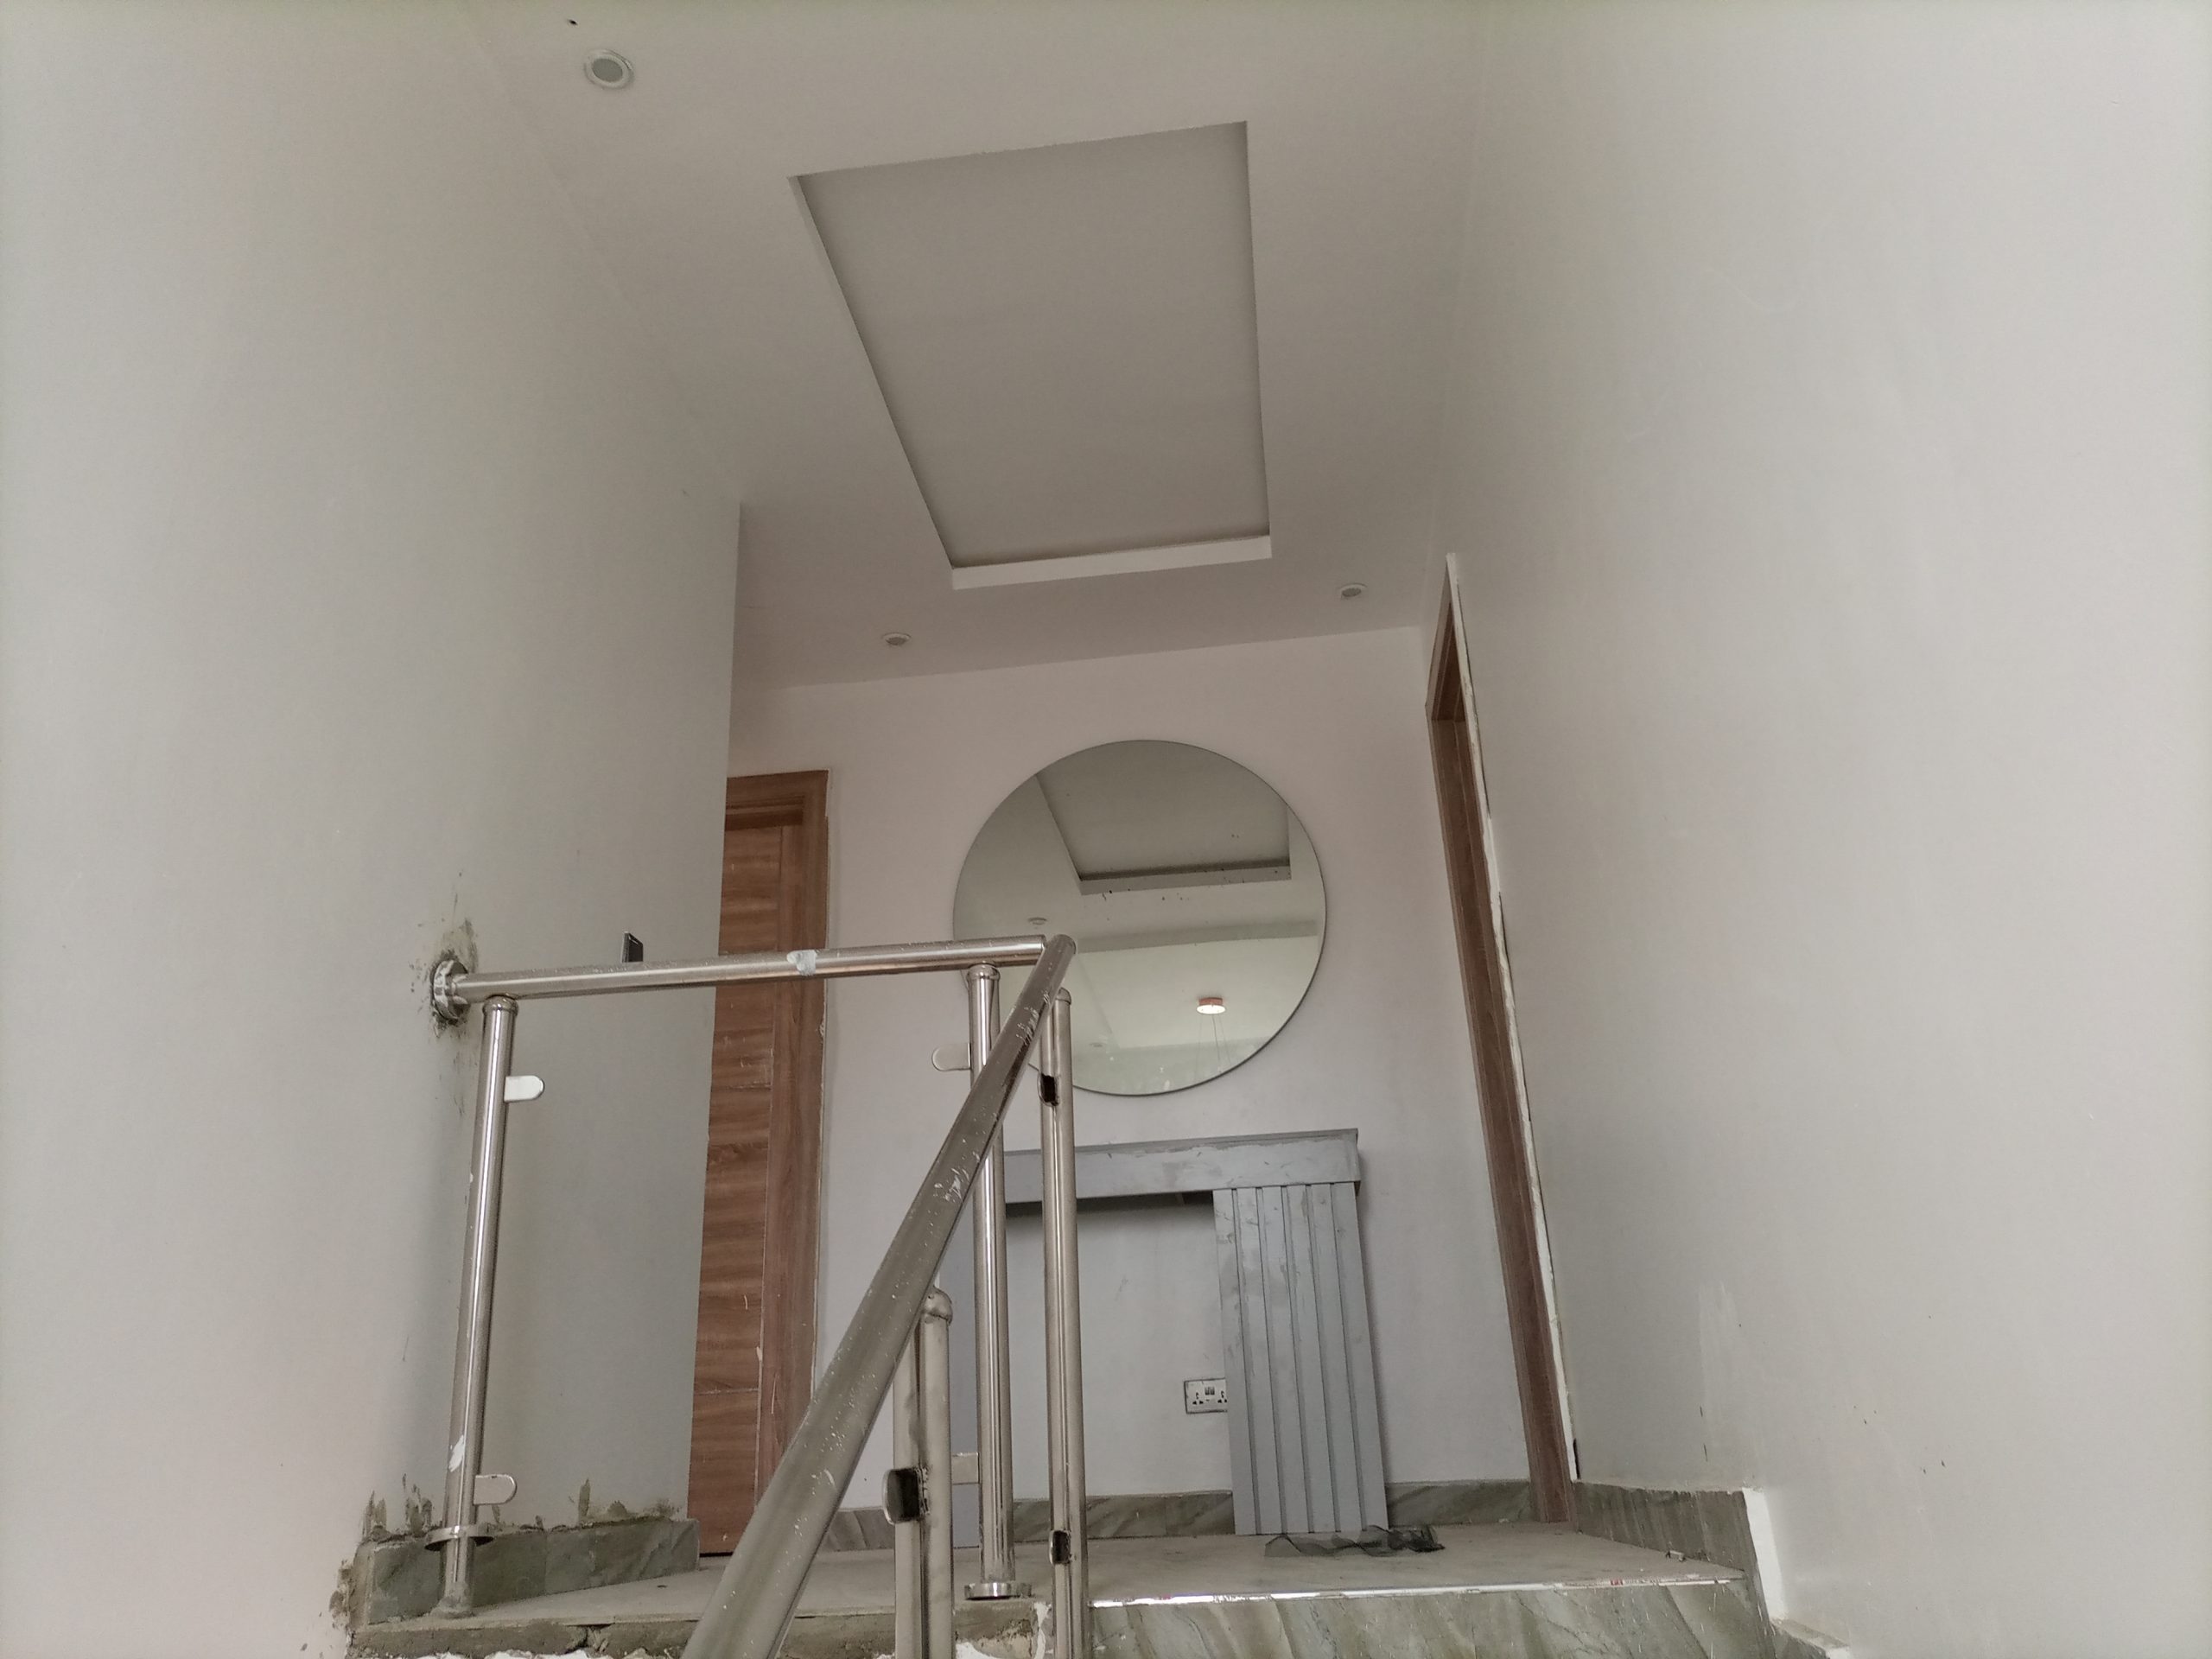 Interior Family Lounge of 2 Bedroom For Sale in Ajah with installment payment at Ambiance Estate